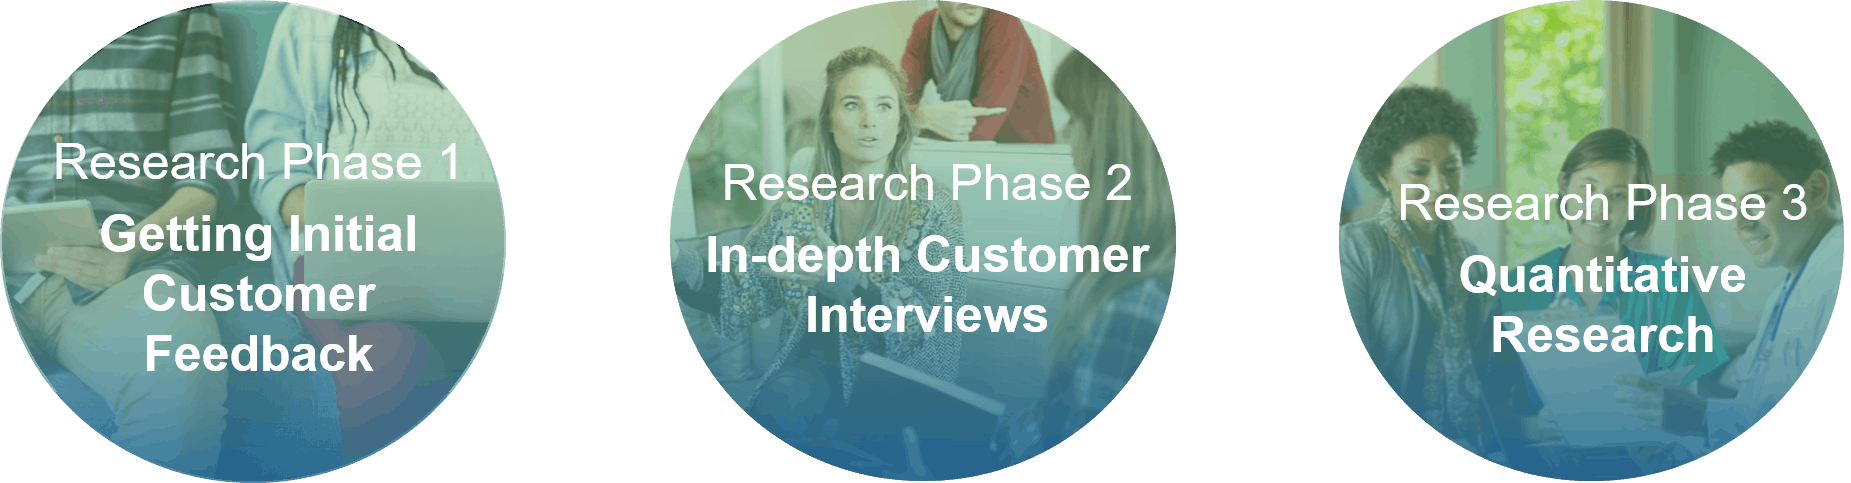 3 phases of customer research for digital innovation